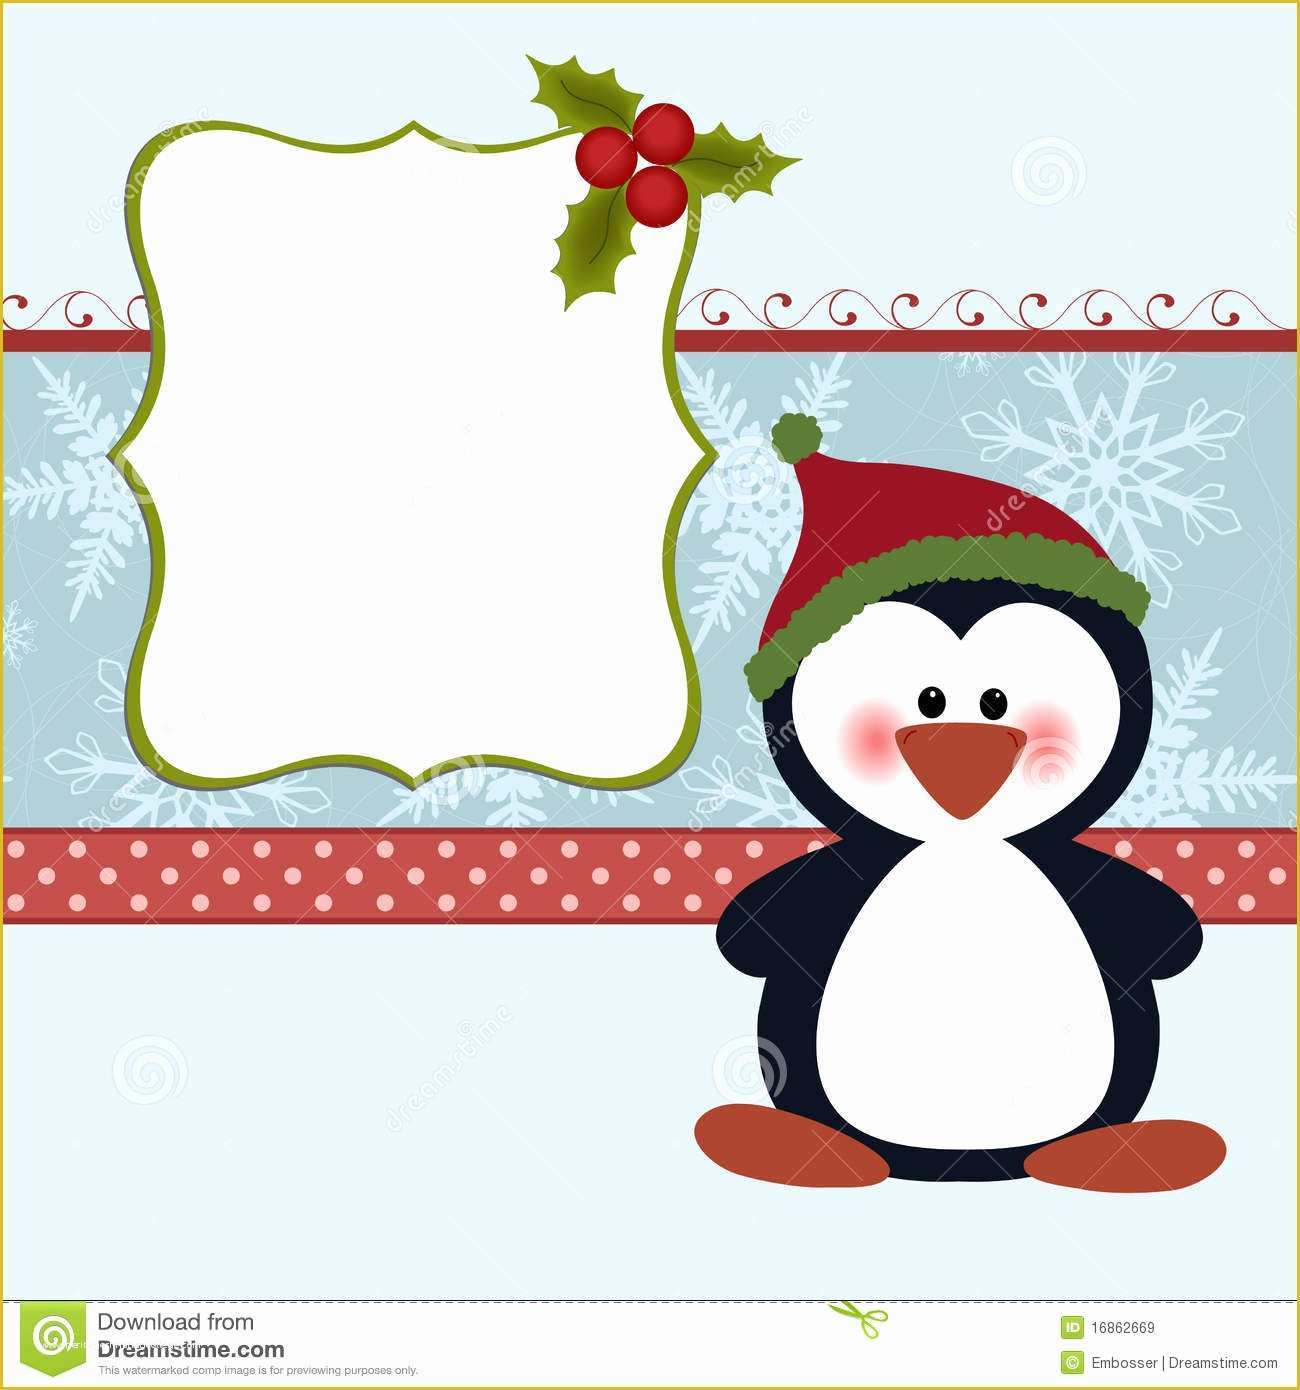 Free Christmas Photo Card Templates Online Of Blank Template for Christmas Greetings Card Royalty Free